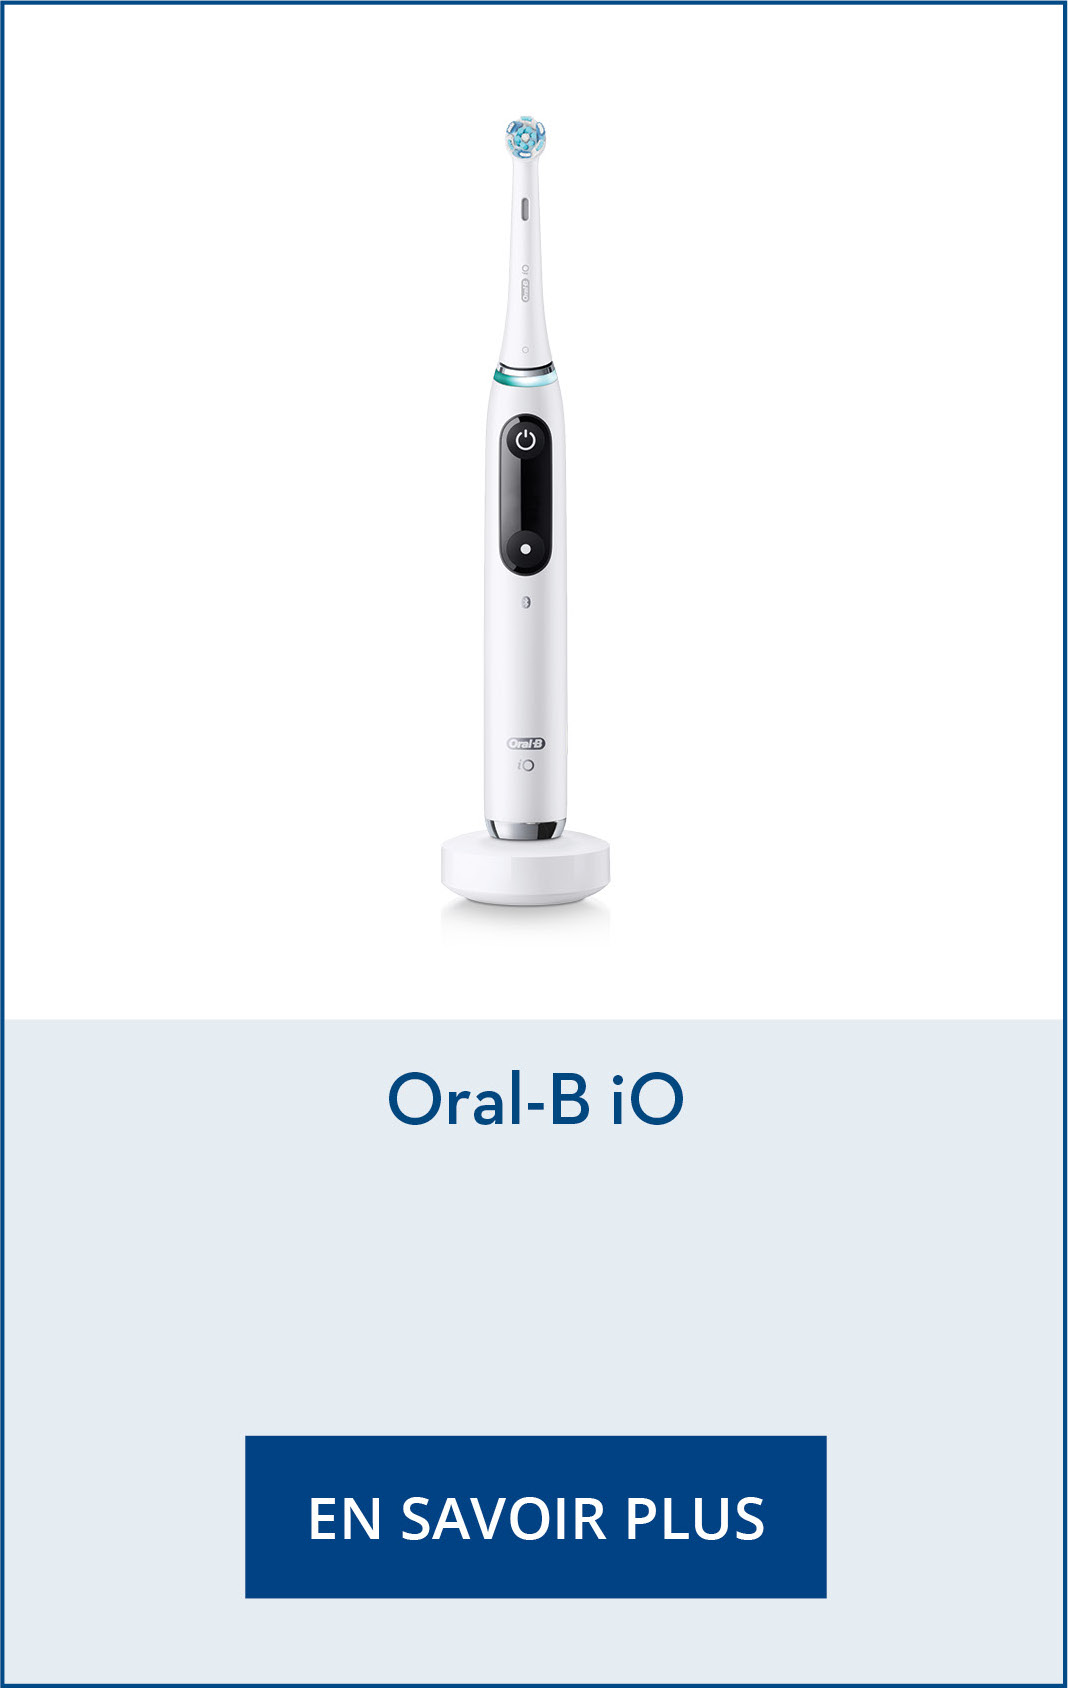 Generic page - Say No To Double Standards - Oral-b IO Image